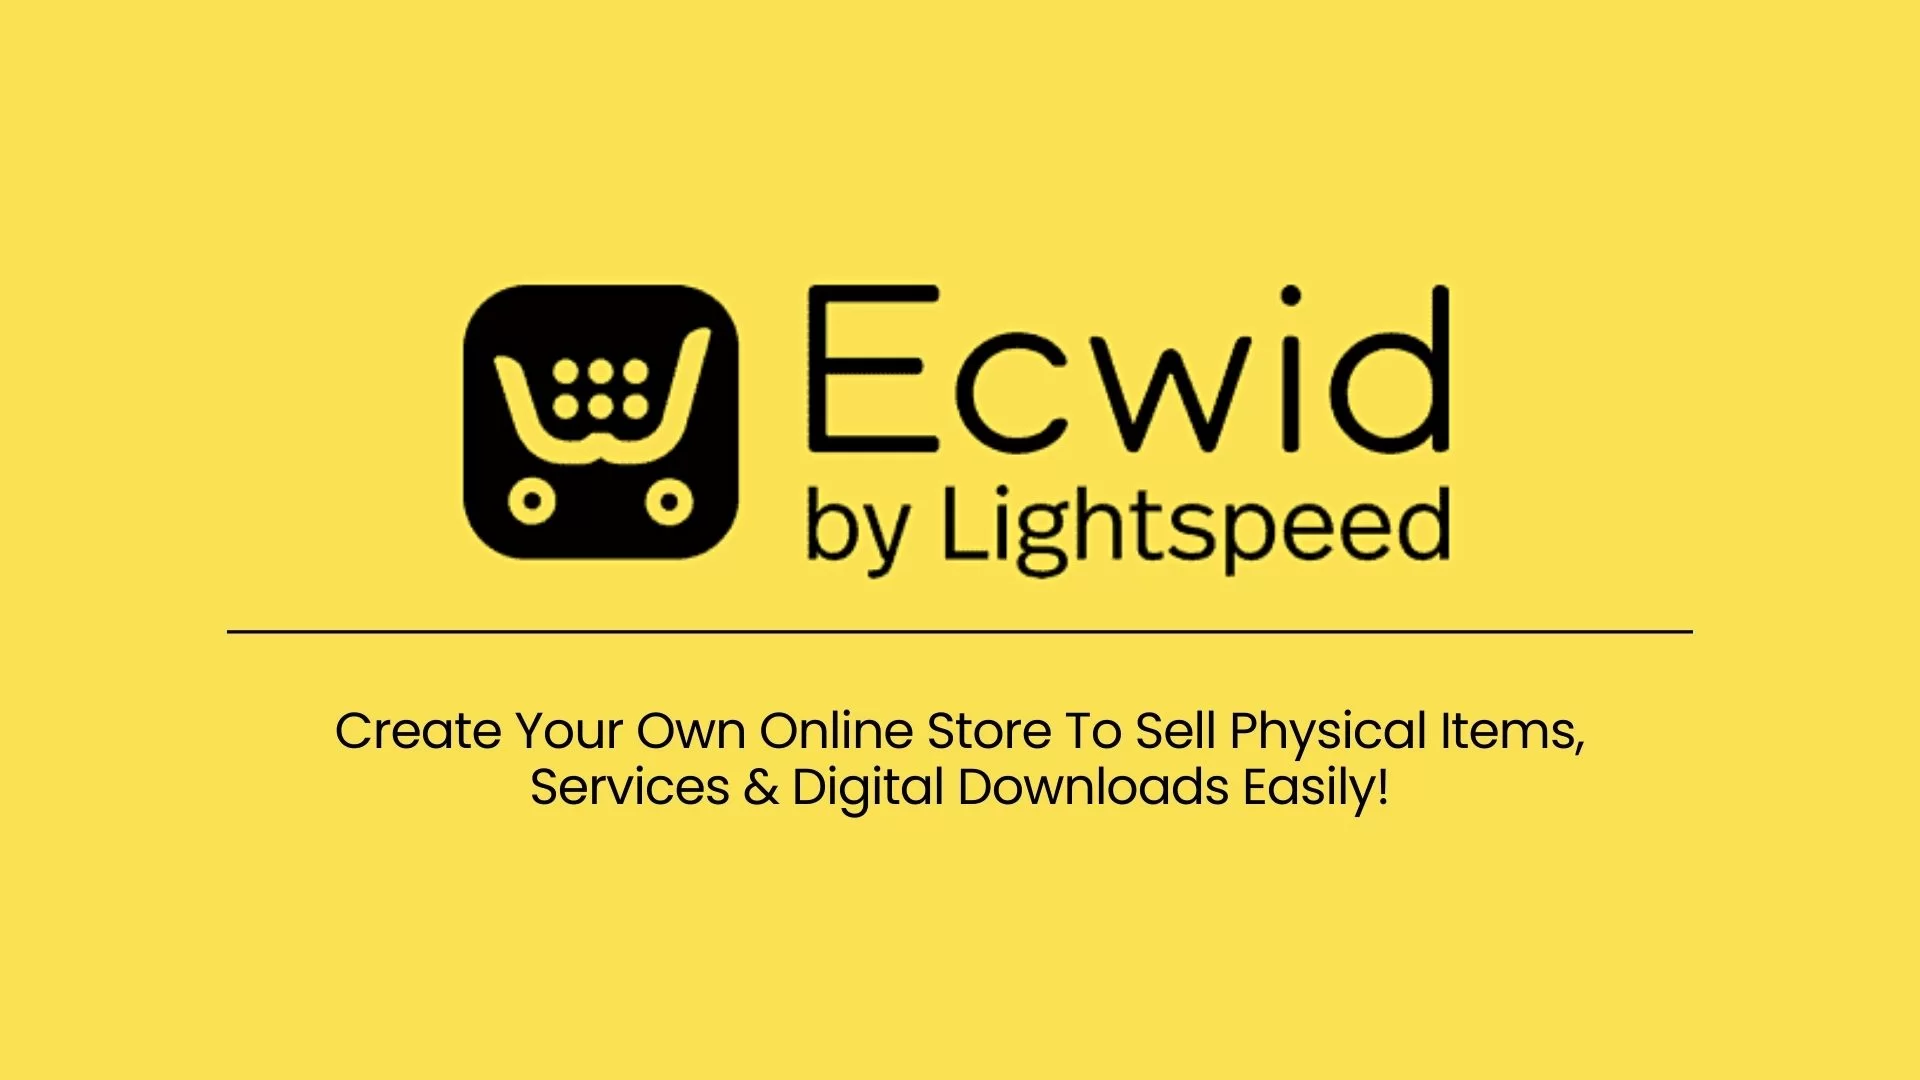 What Is Ecwid?